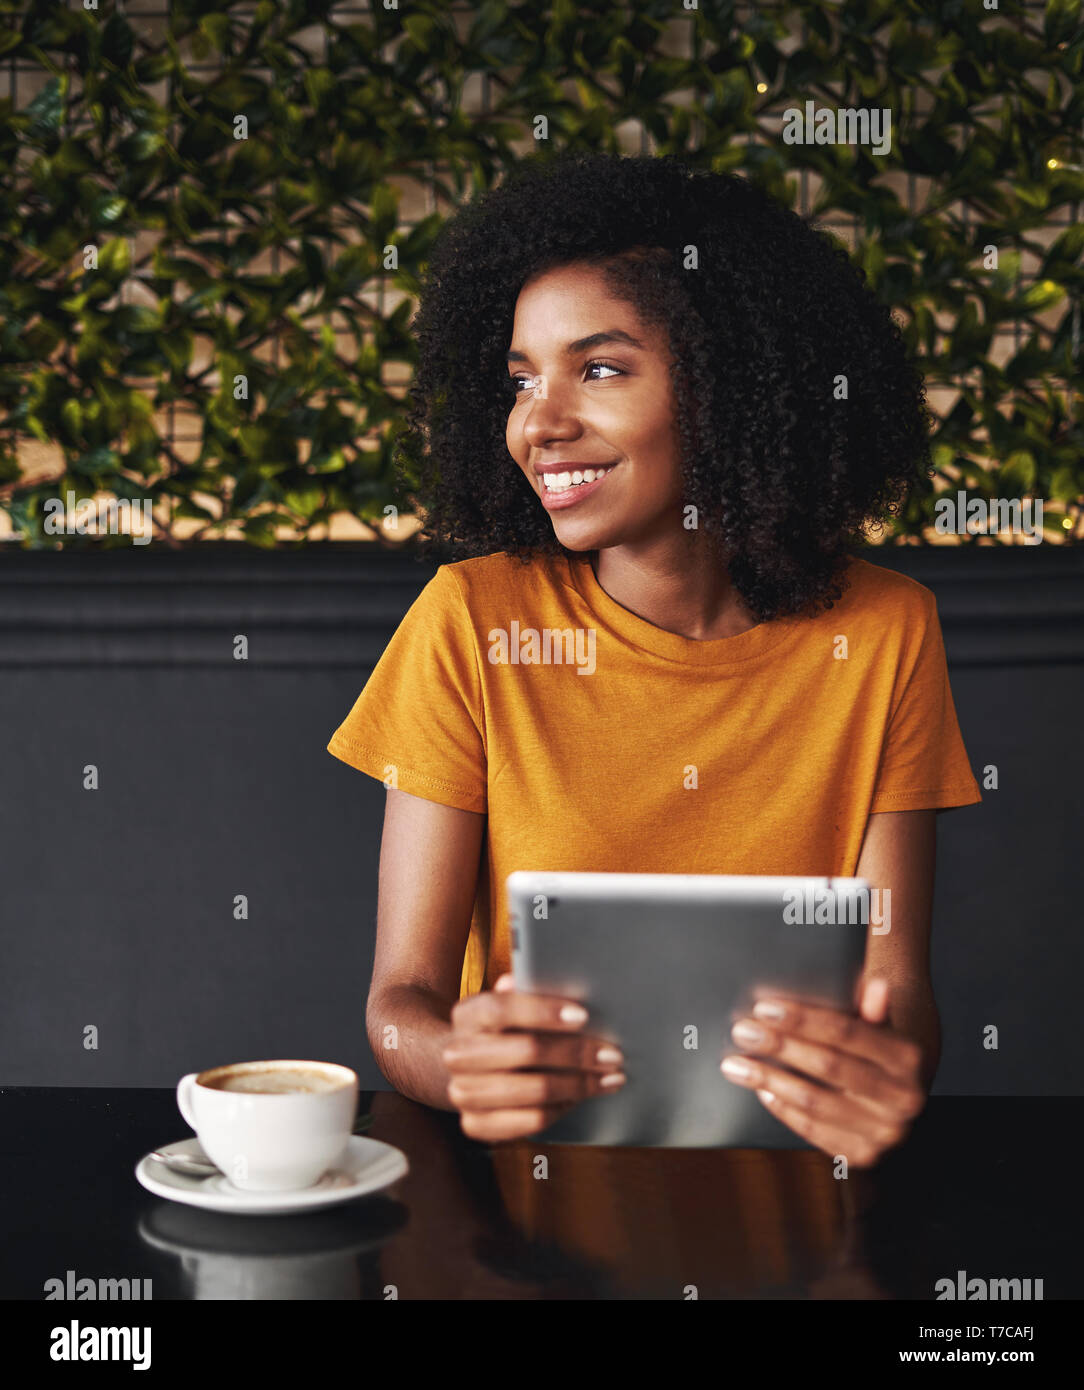 Young woman in cafe holding digital tablet looking away Banque D'Images